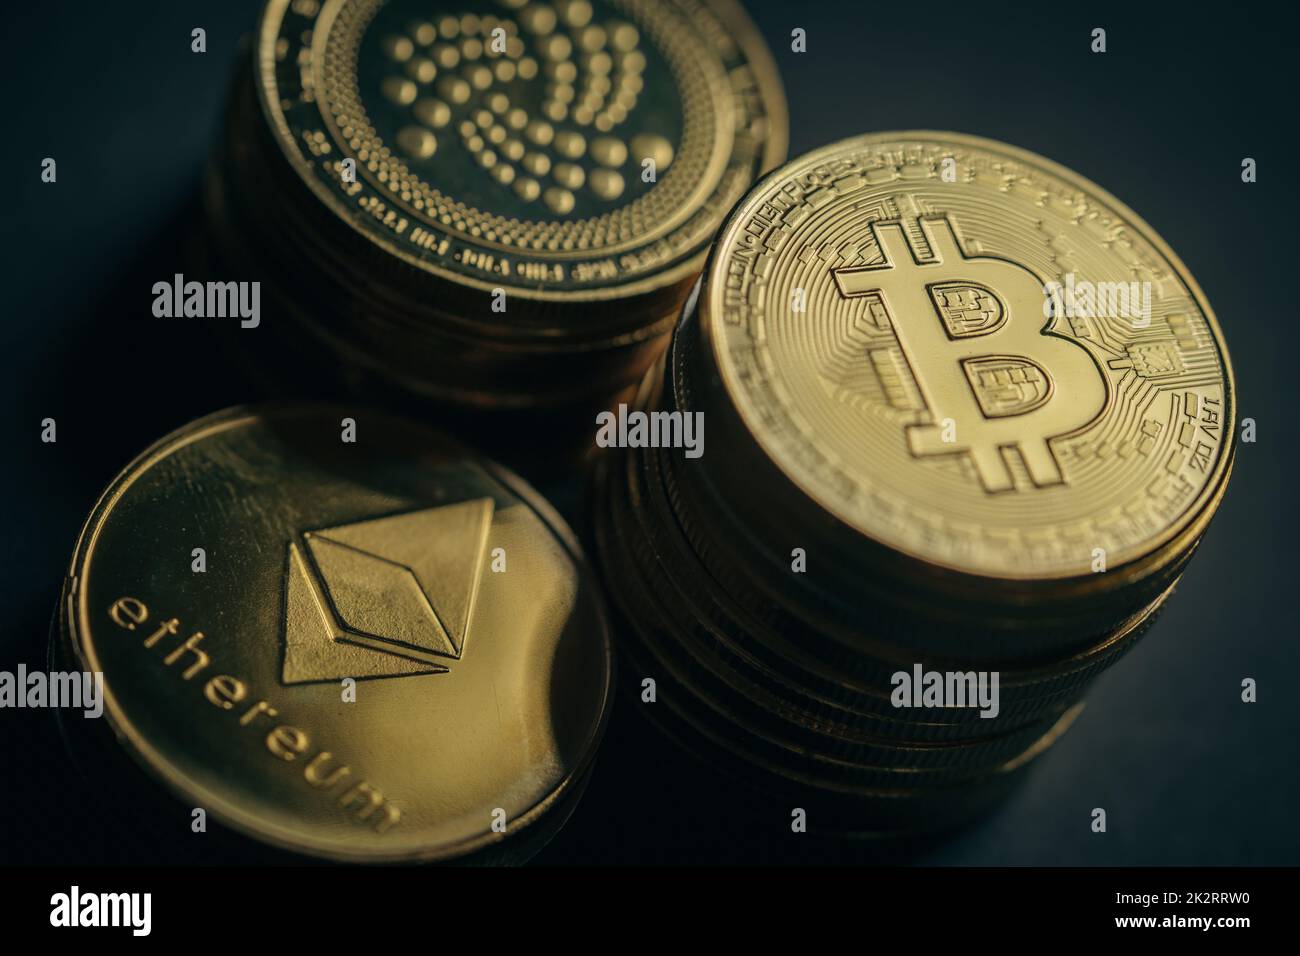 Close up shot of stacks of golden Bitcoin, IOTA and Ethereum digital cryptocurrency coins. Stock Photo